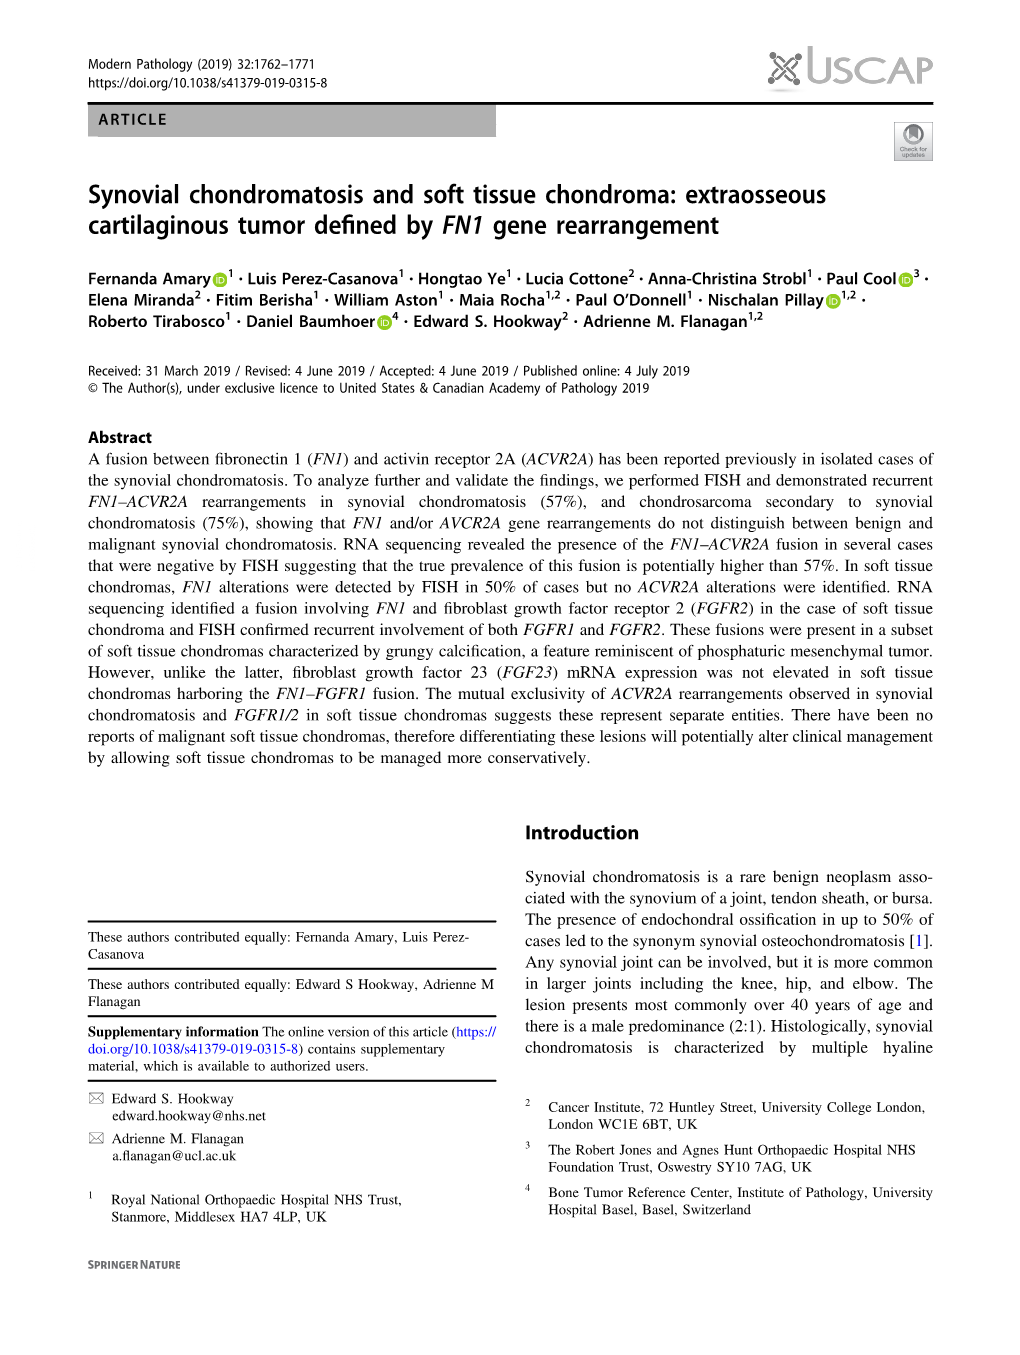 Synovial Chondromatosis and Soft Tissue Chondroma: Extraosseous ...